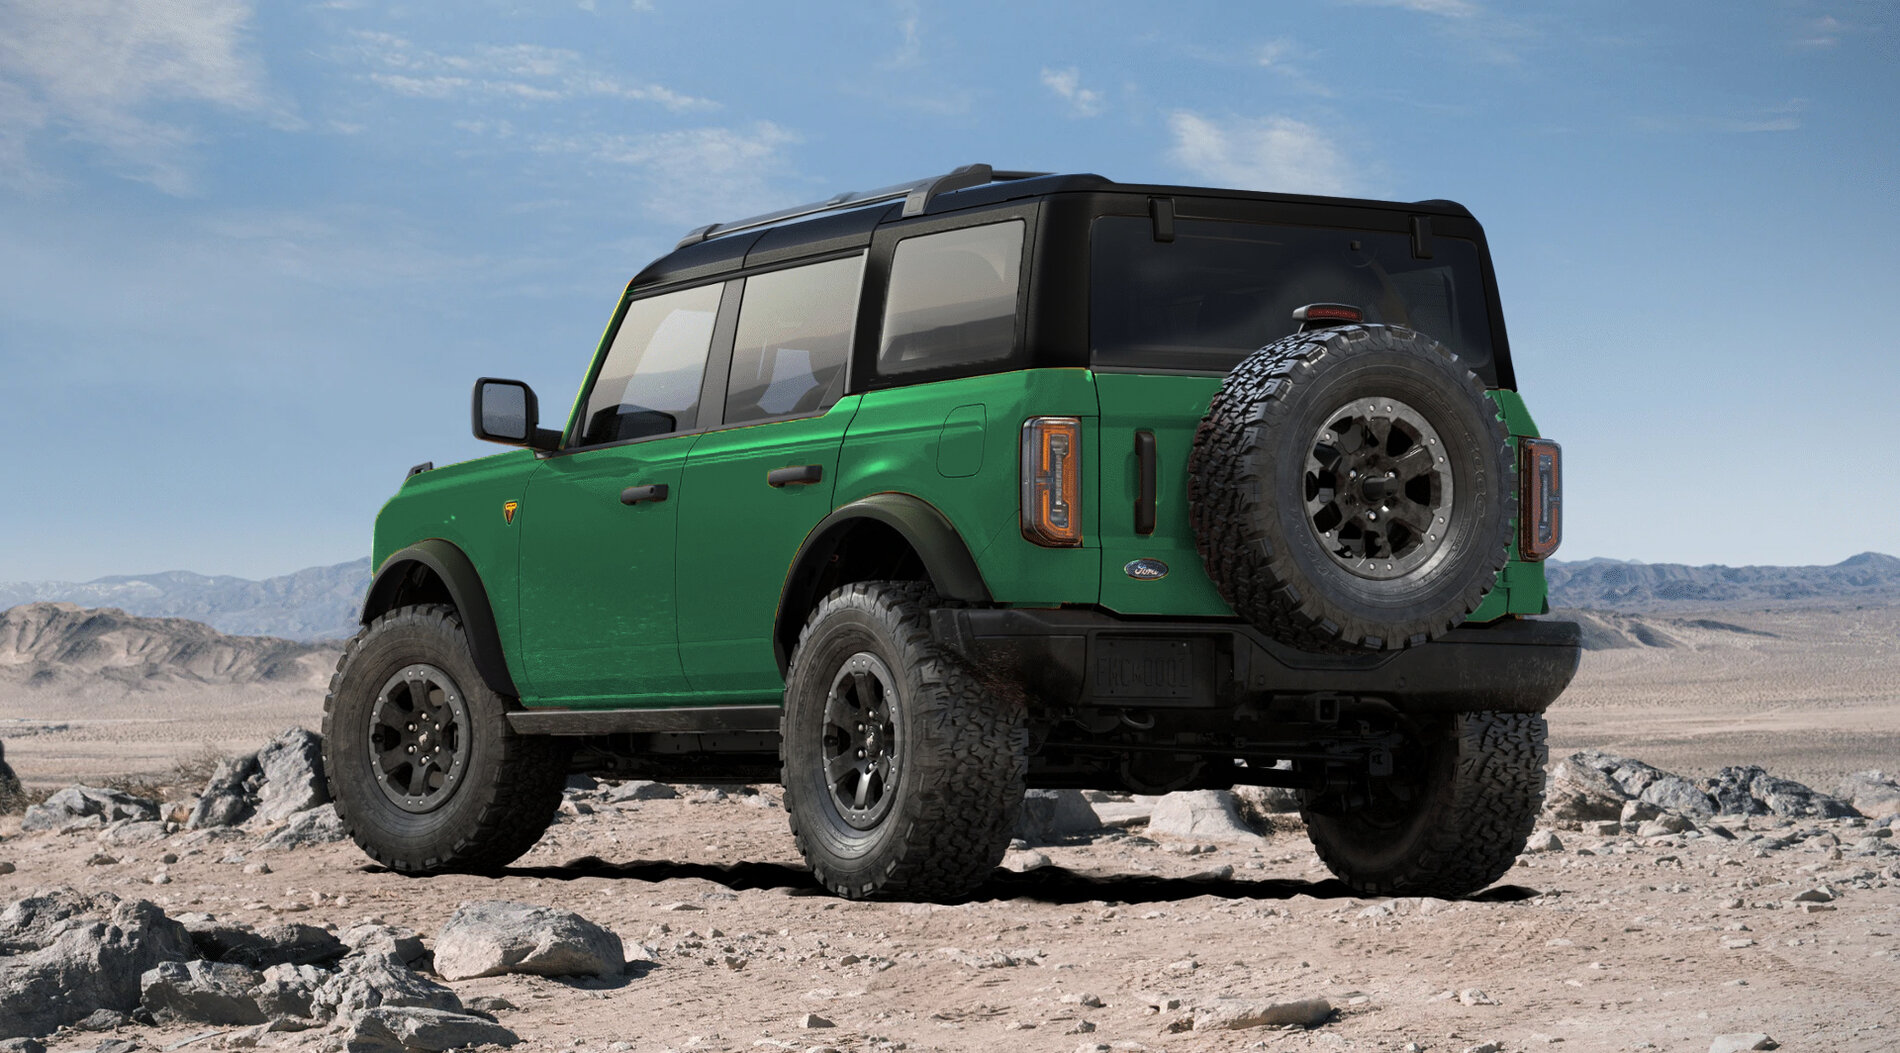 Ford Bronco Rendering: 2022 Boxwood Green and Cactus Gray OBX with 33s + white tops + shadow black tops 1611600252463